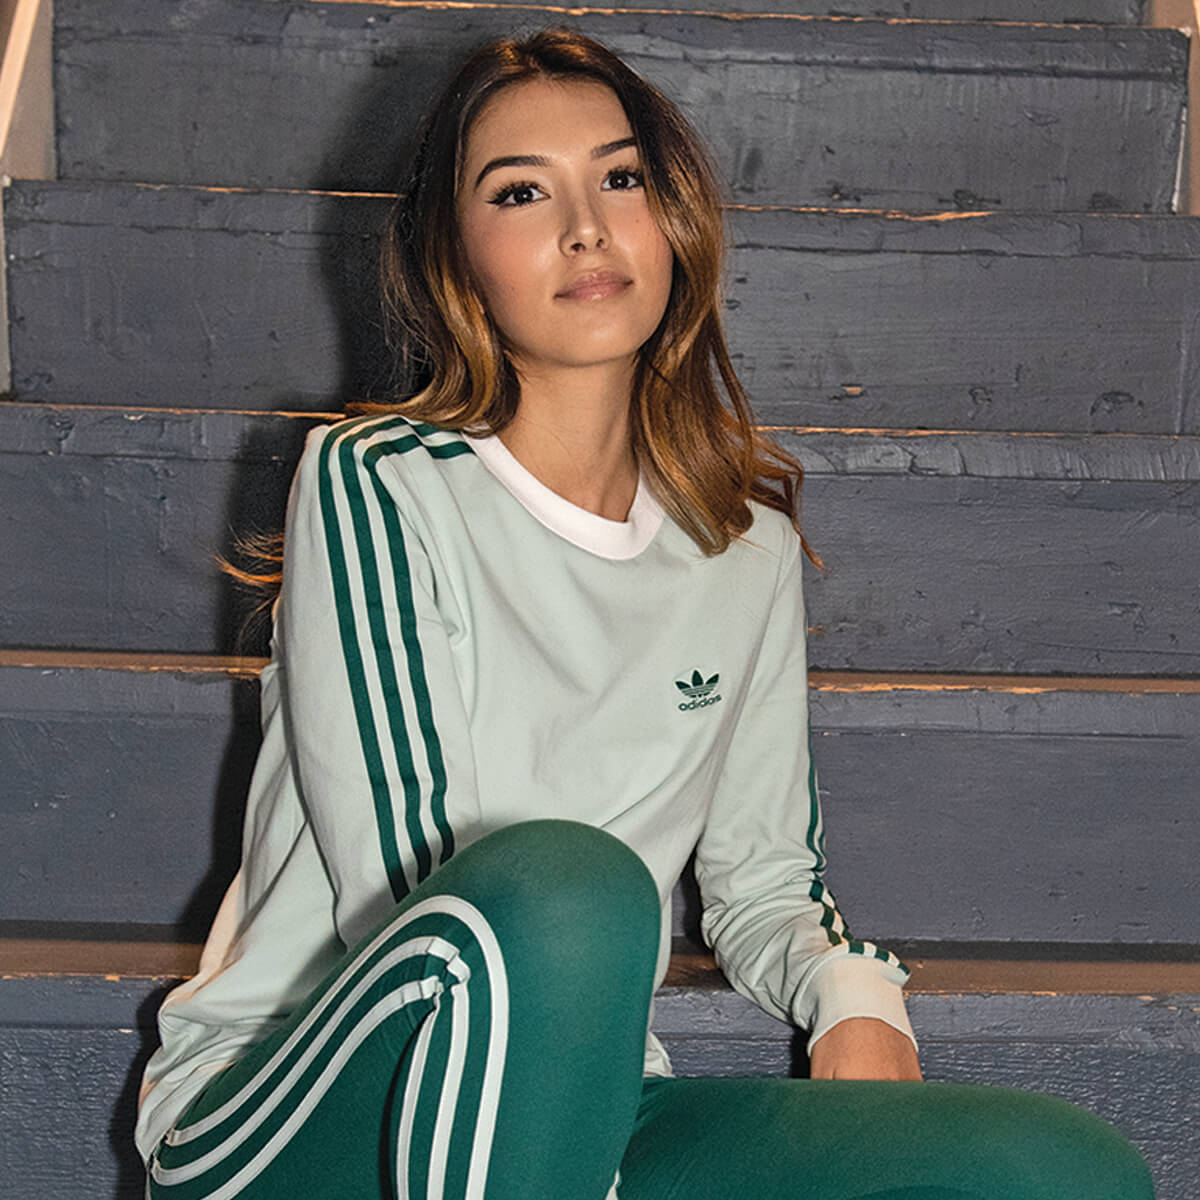 WOMEN'S ADIDAS NEW ARRIVAL LONG SLEEVE TEES & MORE - SHOP NEW ADIDAS